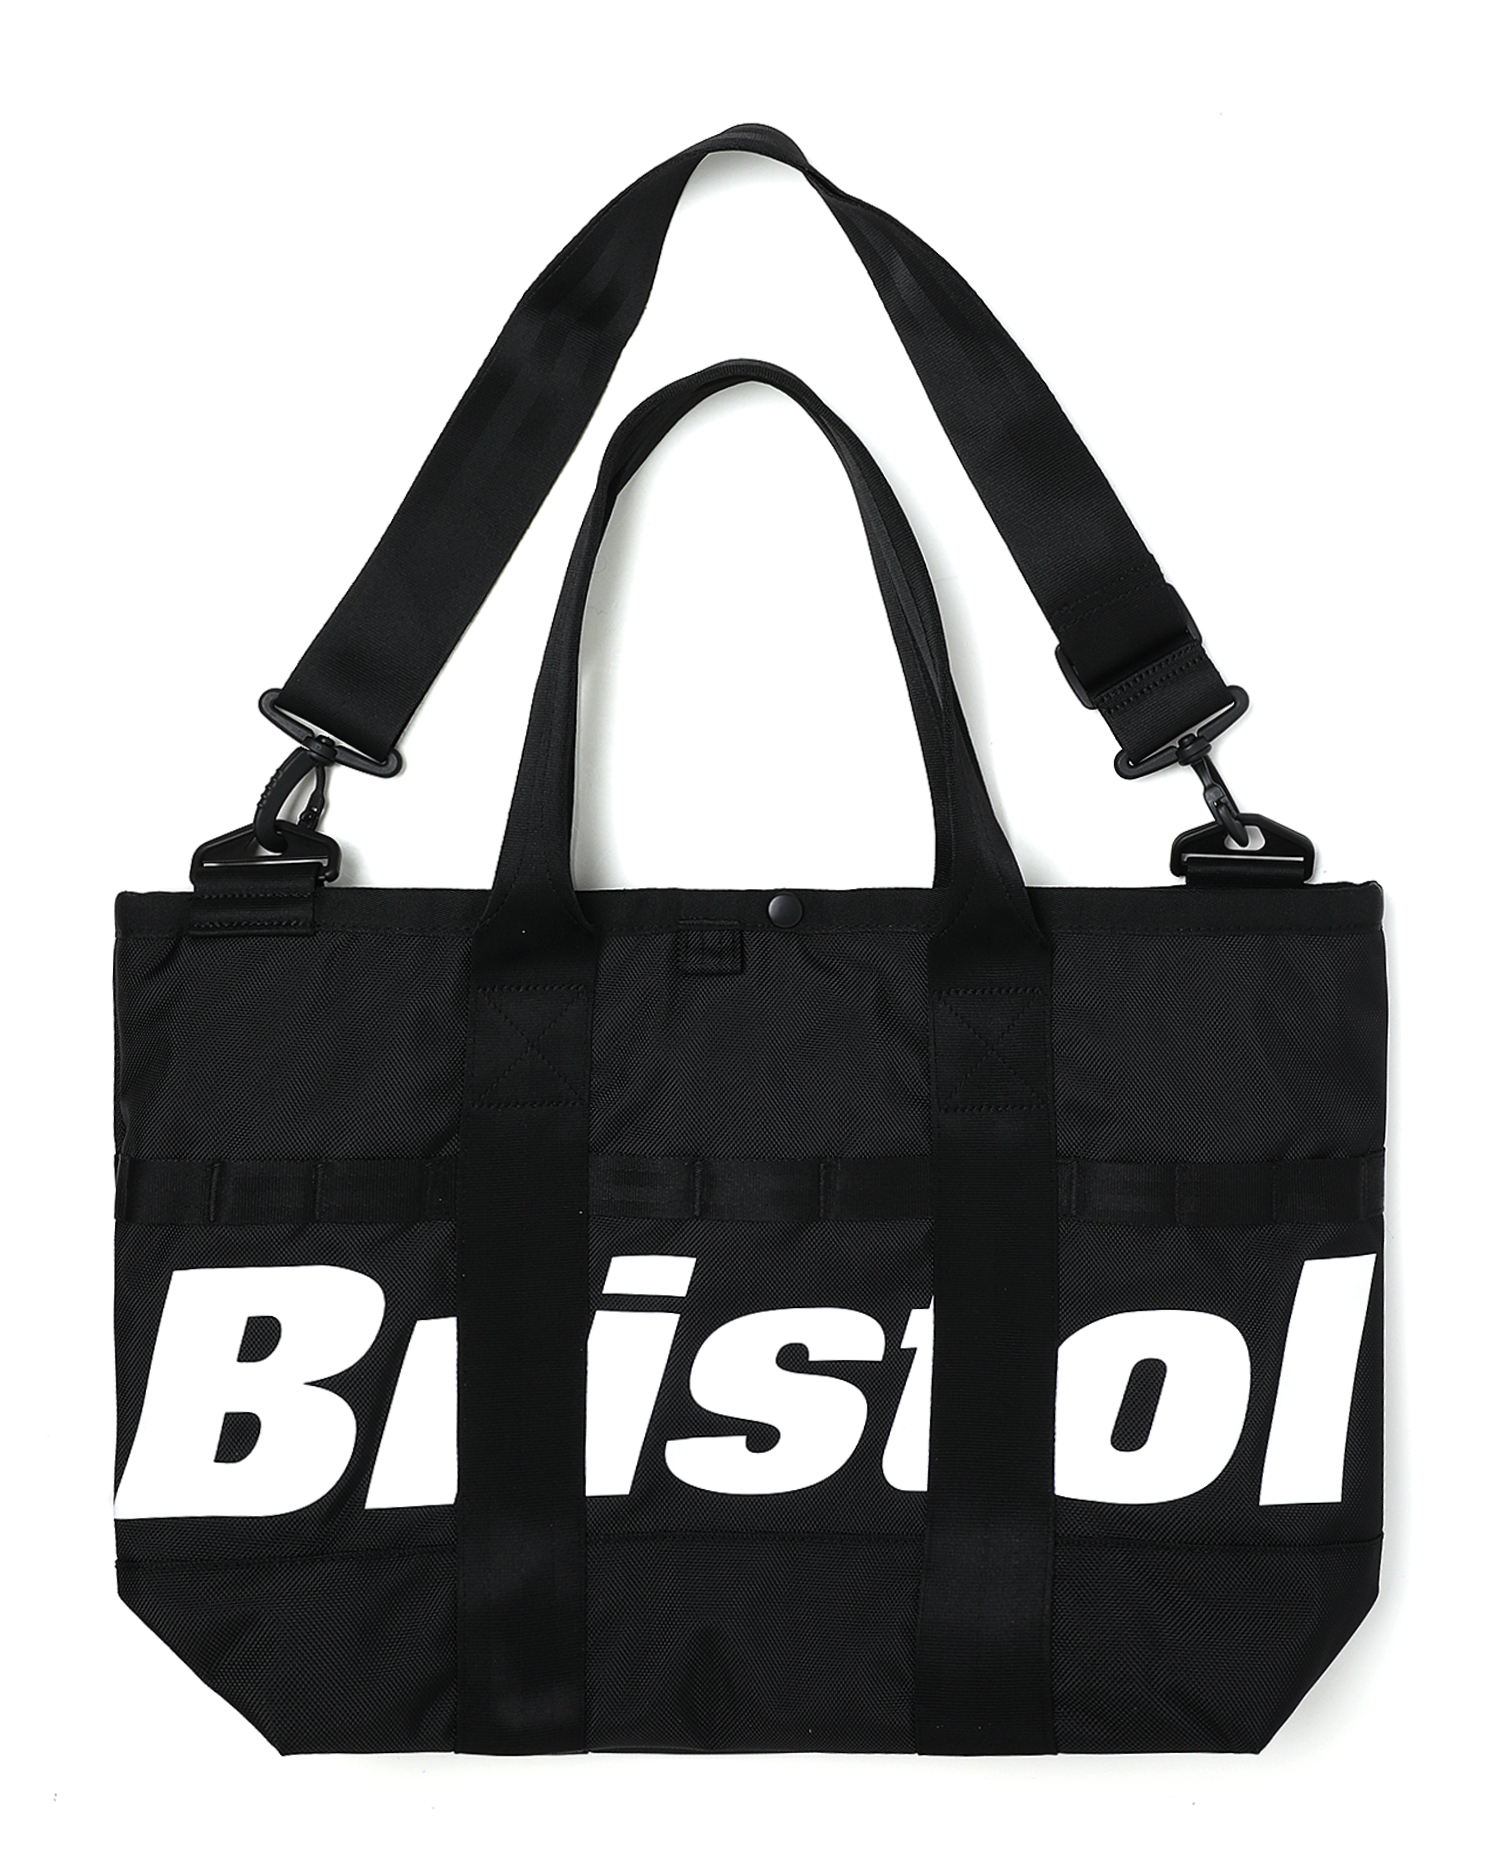 SMALL TOTE BAG fcrb 23ss ブリストル トートバッグ 1 - トートバッグ